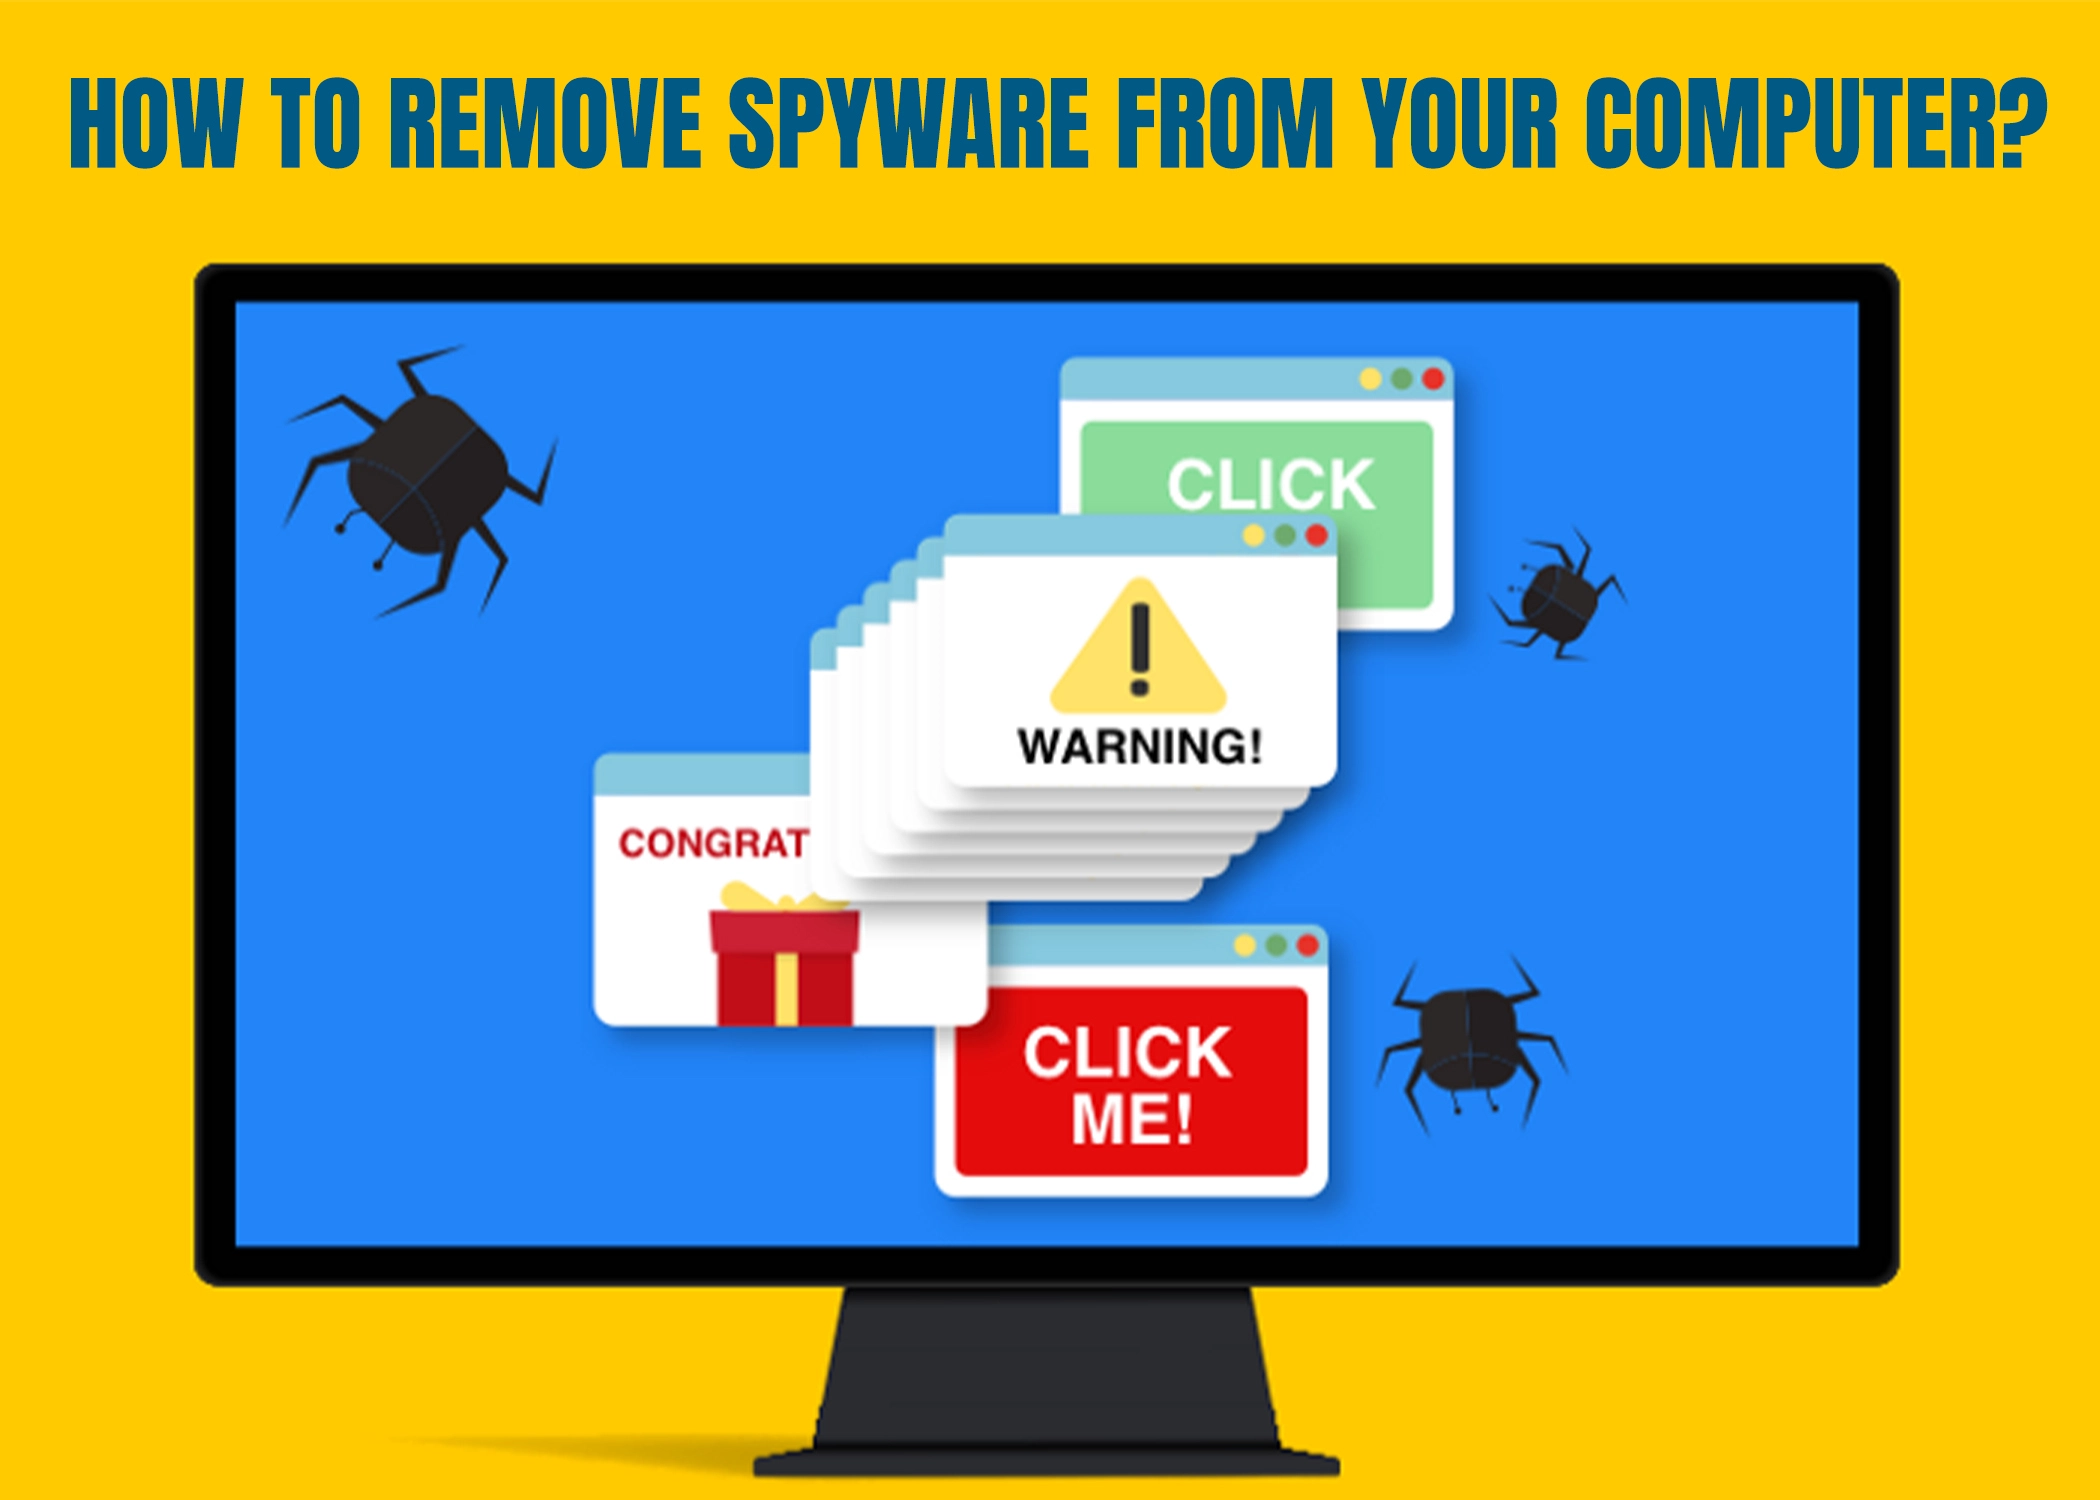 How to Remove Spyware From Your Computer?